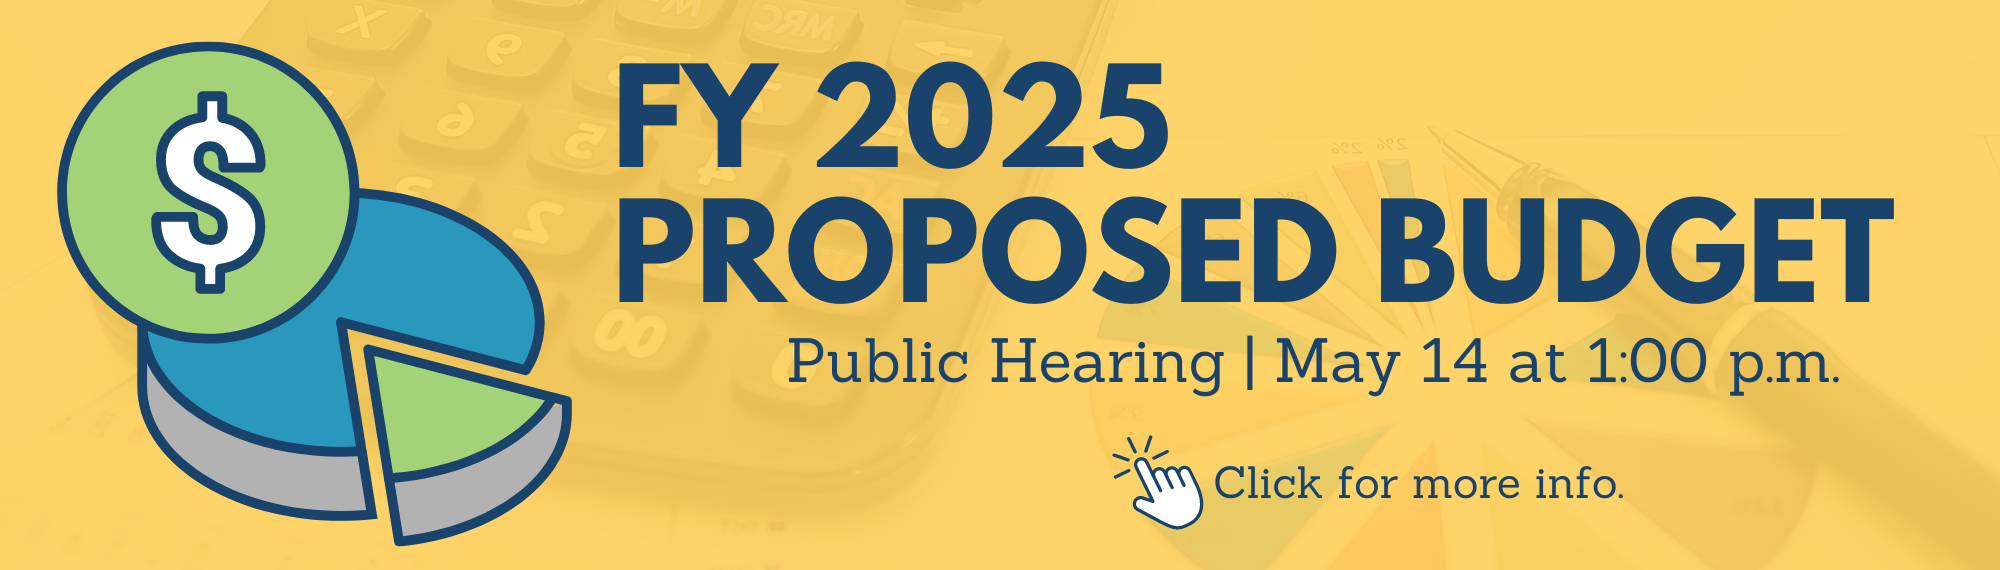 FY 2025 Proposed Budget - Public Hearing May 14 at 1:00pm. Click for more info.